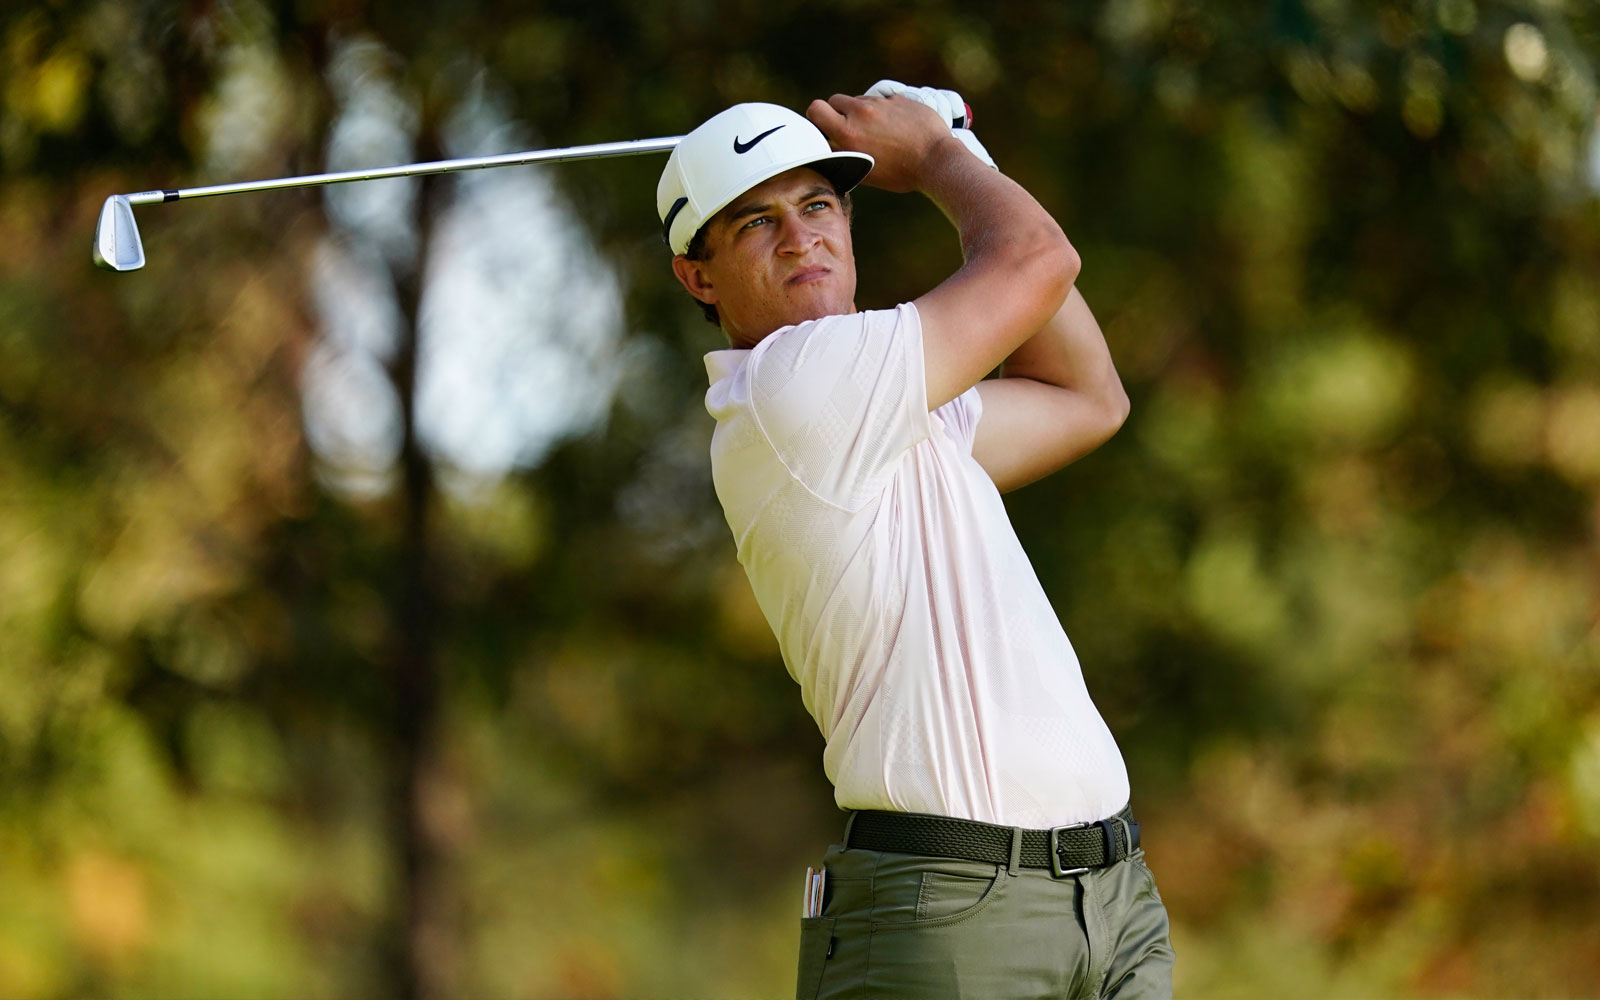 New-Drive-To-Survive-Inspired-PGA-Golf-Series-Coming-To-Netflix-Cameron-Champ